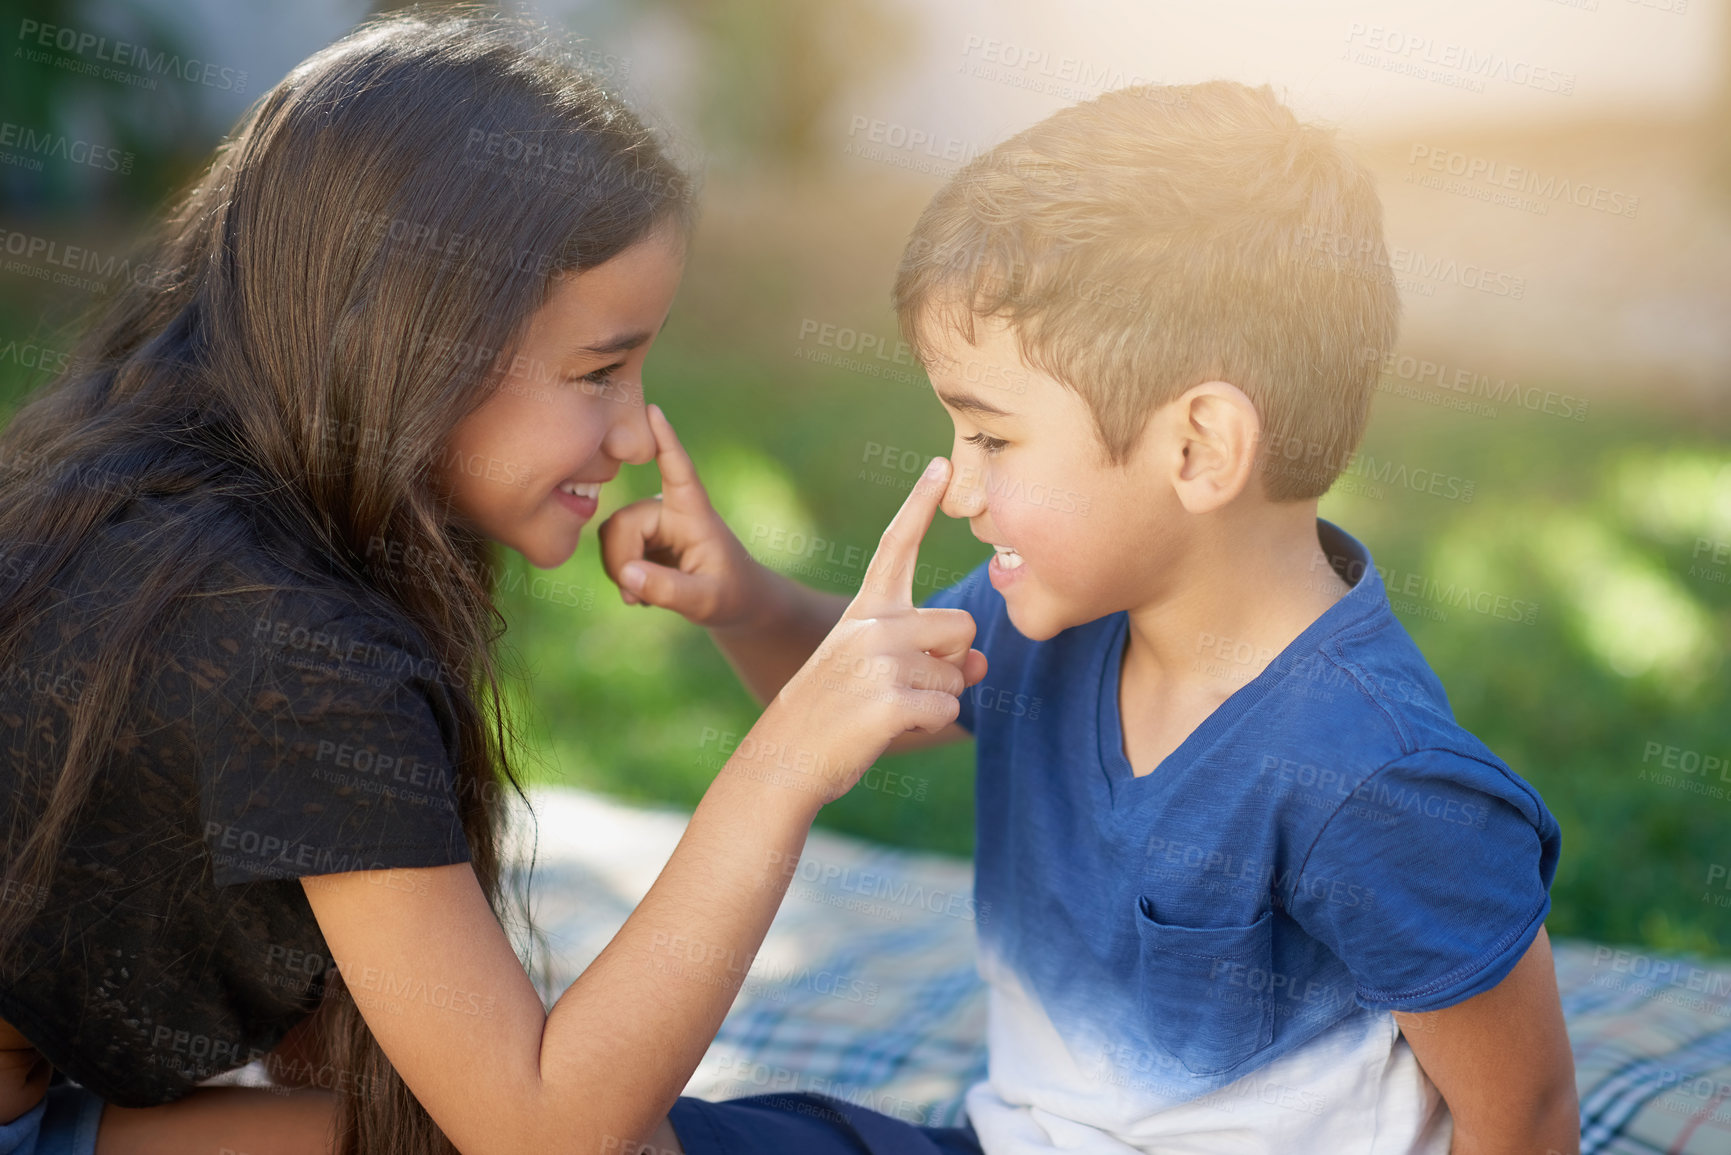 Buy stock photo Shot of a young brother and sister touching each other's noses while playing outside their home